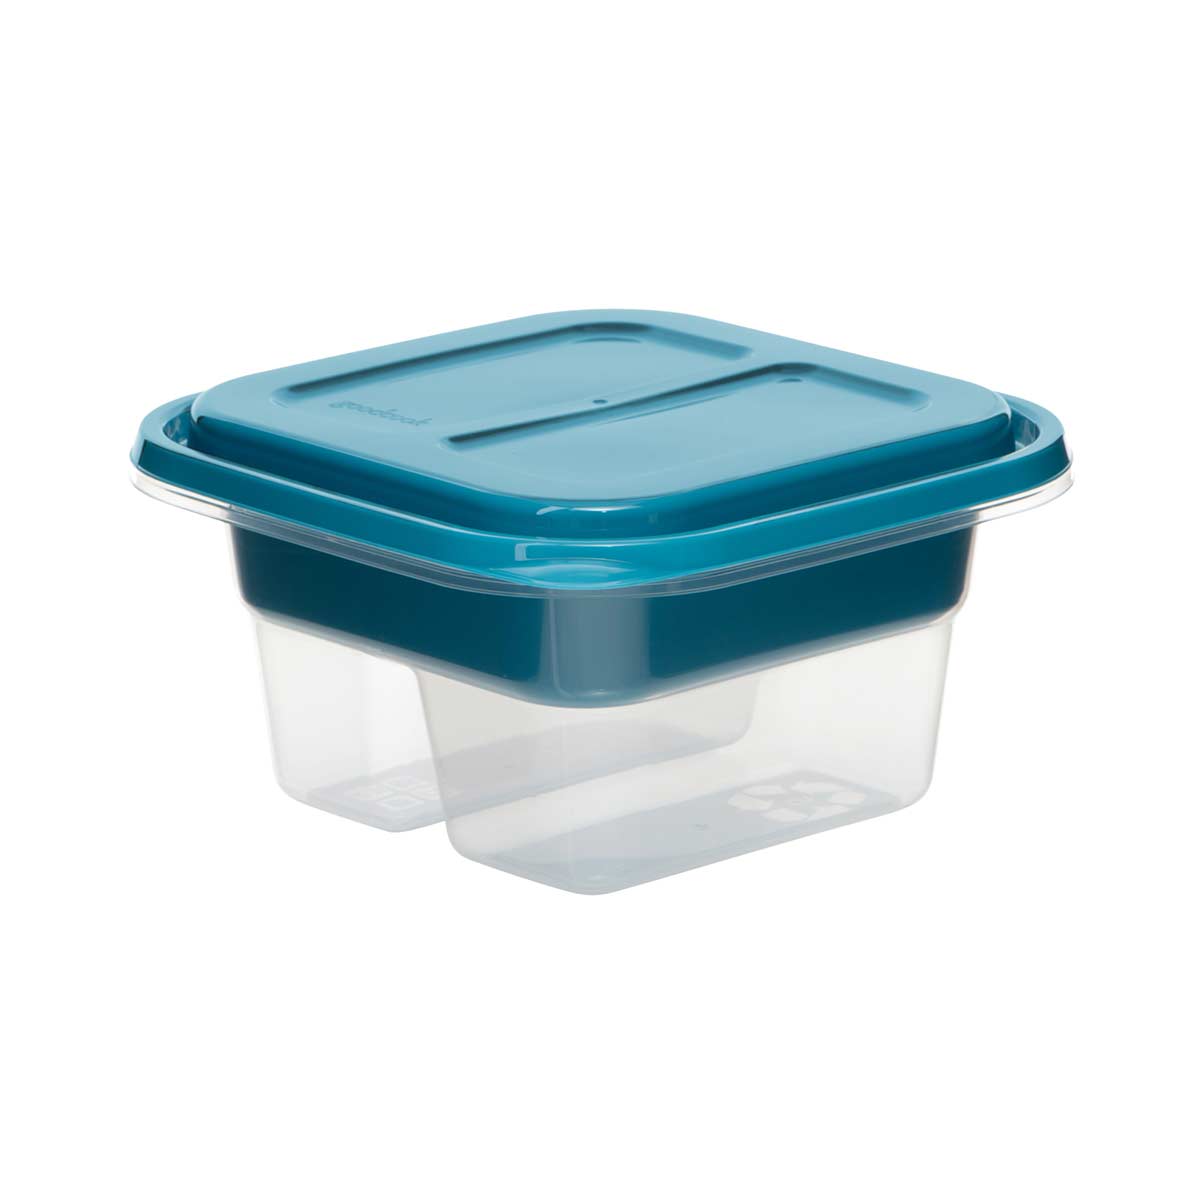 GoodCook EveryWare Food Container 4-pack Set Extra Large